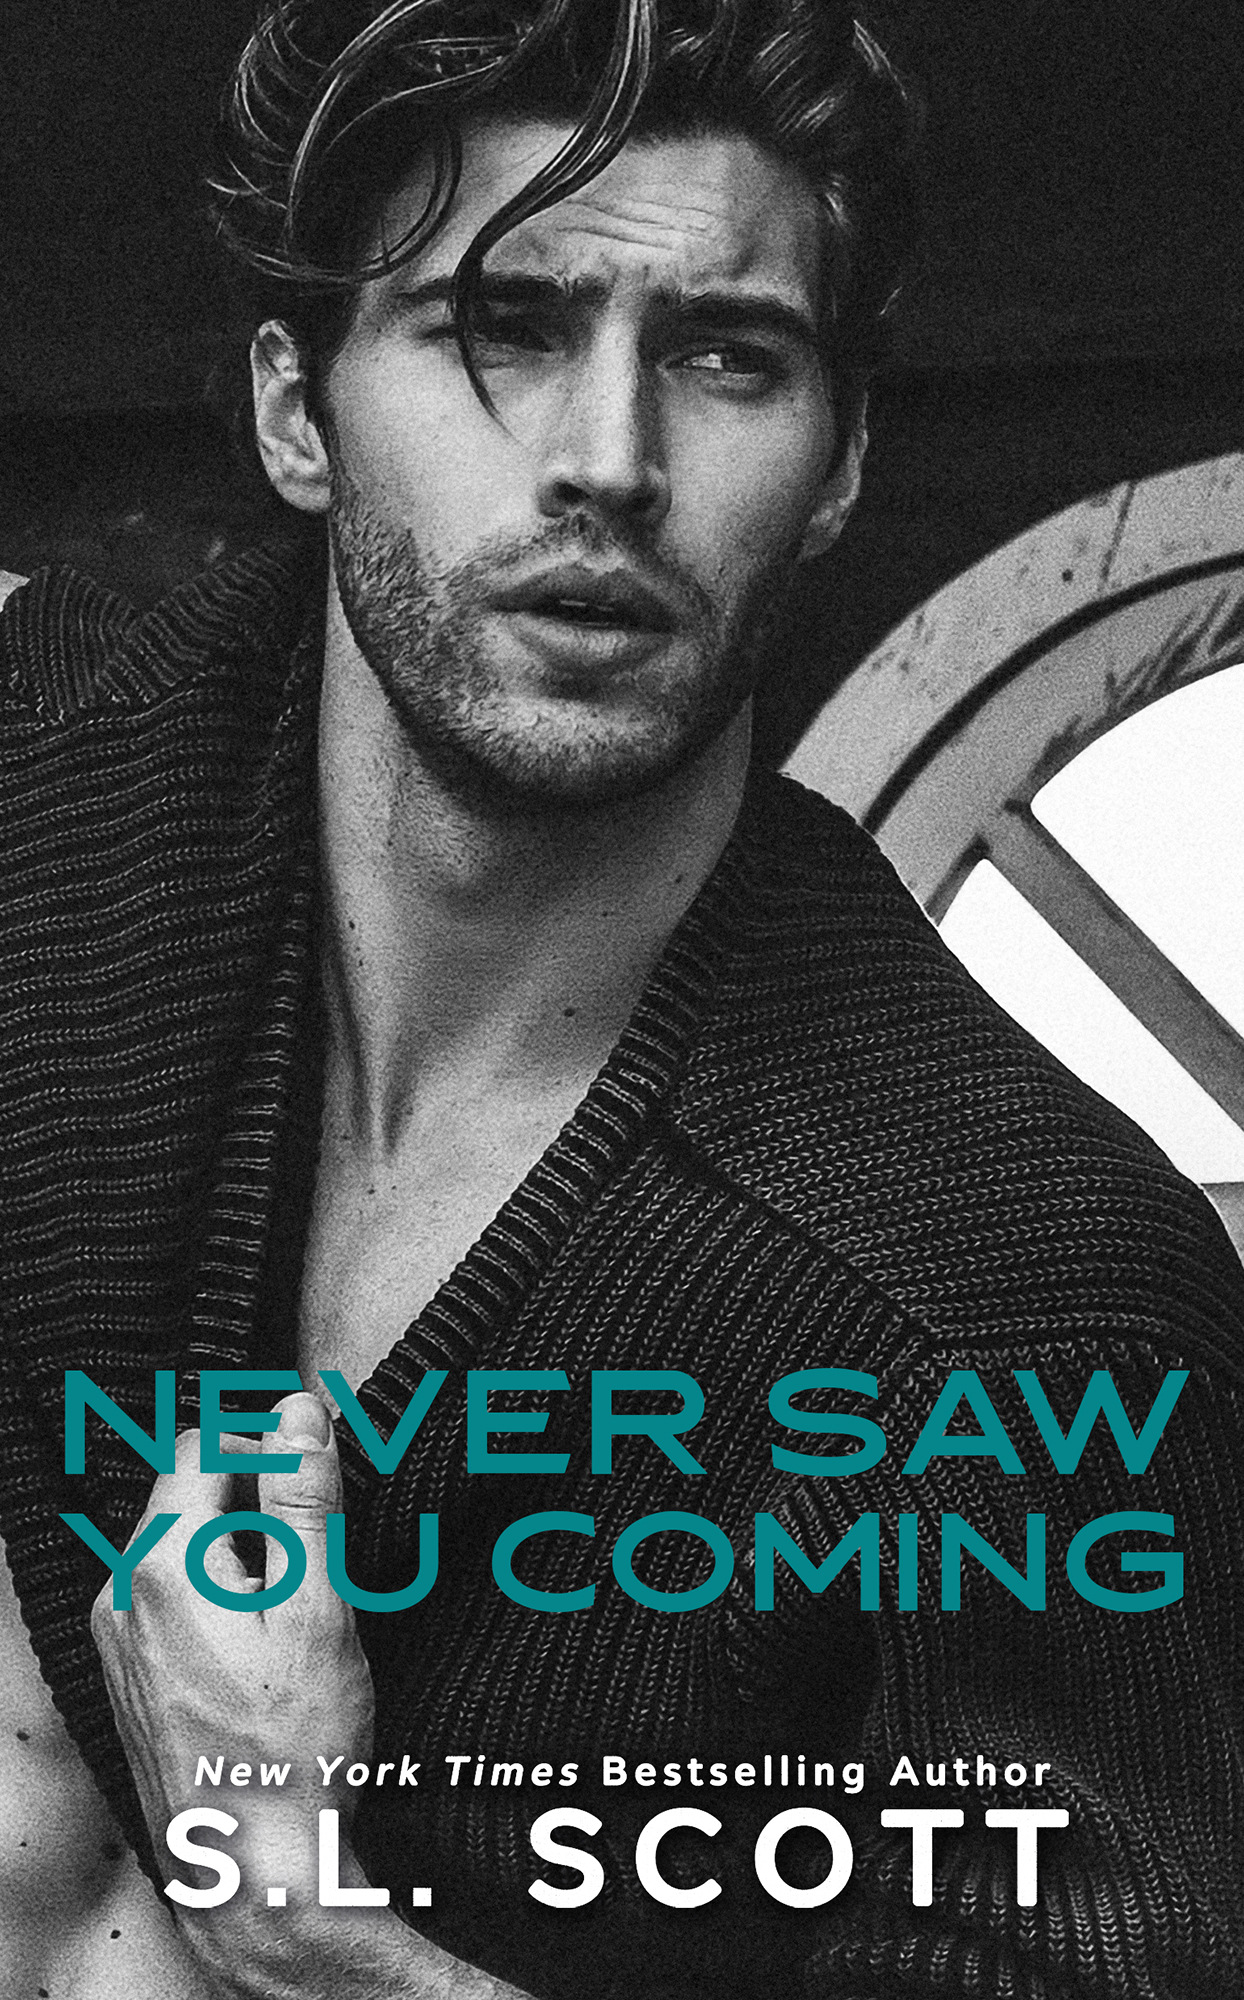 Never Saw You Coming by S.L. Scott PDF Download